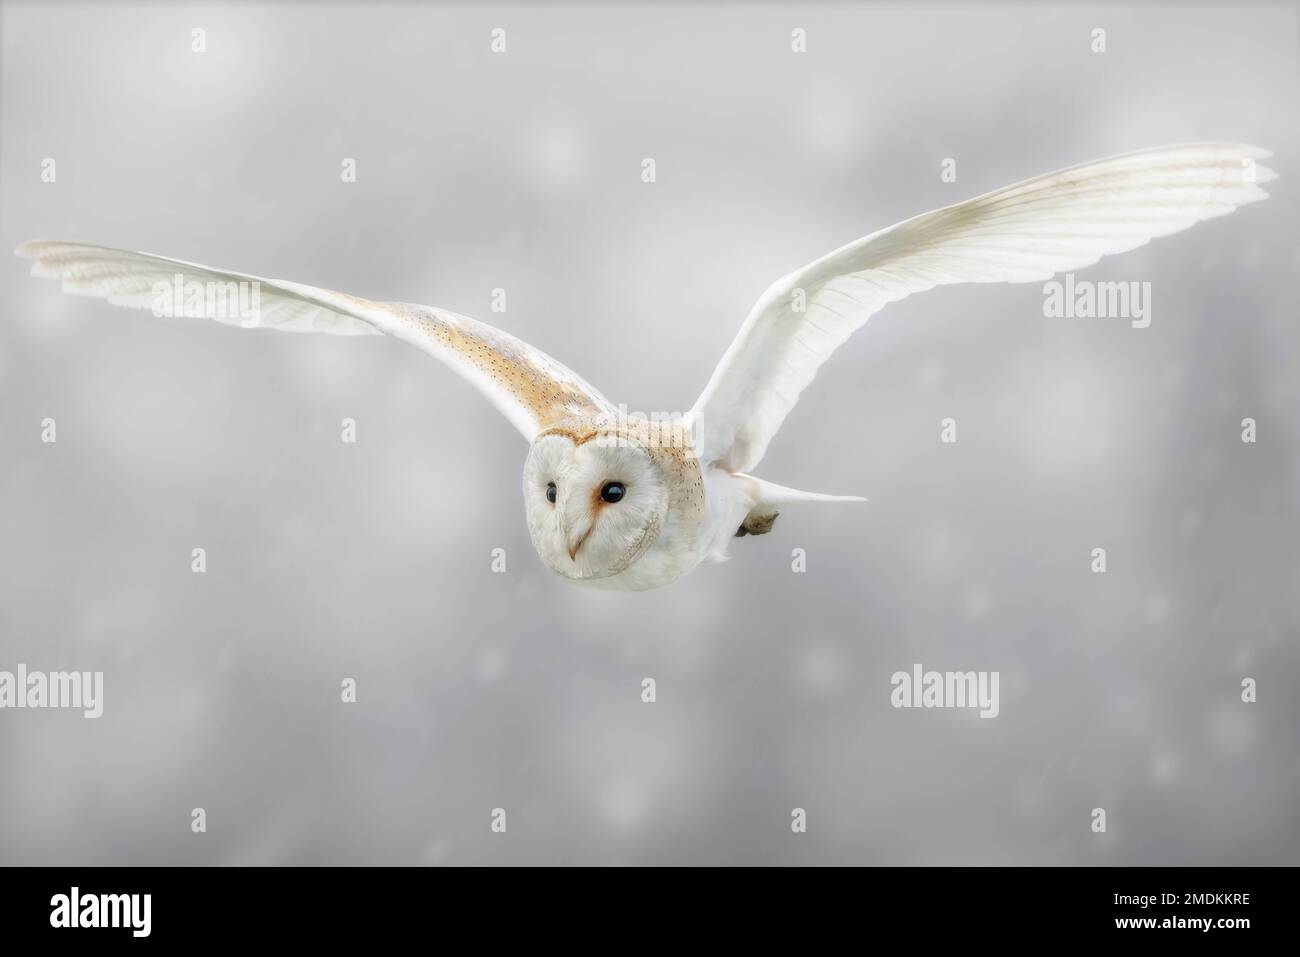 A barn owl taking flight. Yorkshire, UK: THESE STUNNING images taken on last Friday 20th January show a Yorkshire barn owl darting in and out of the f Stock Photo